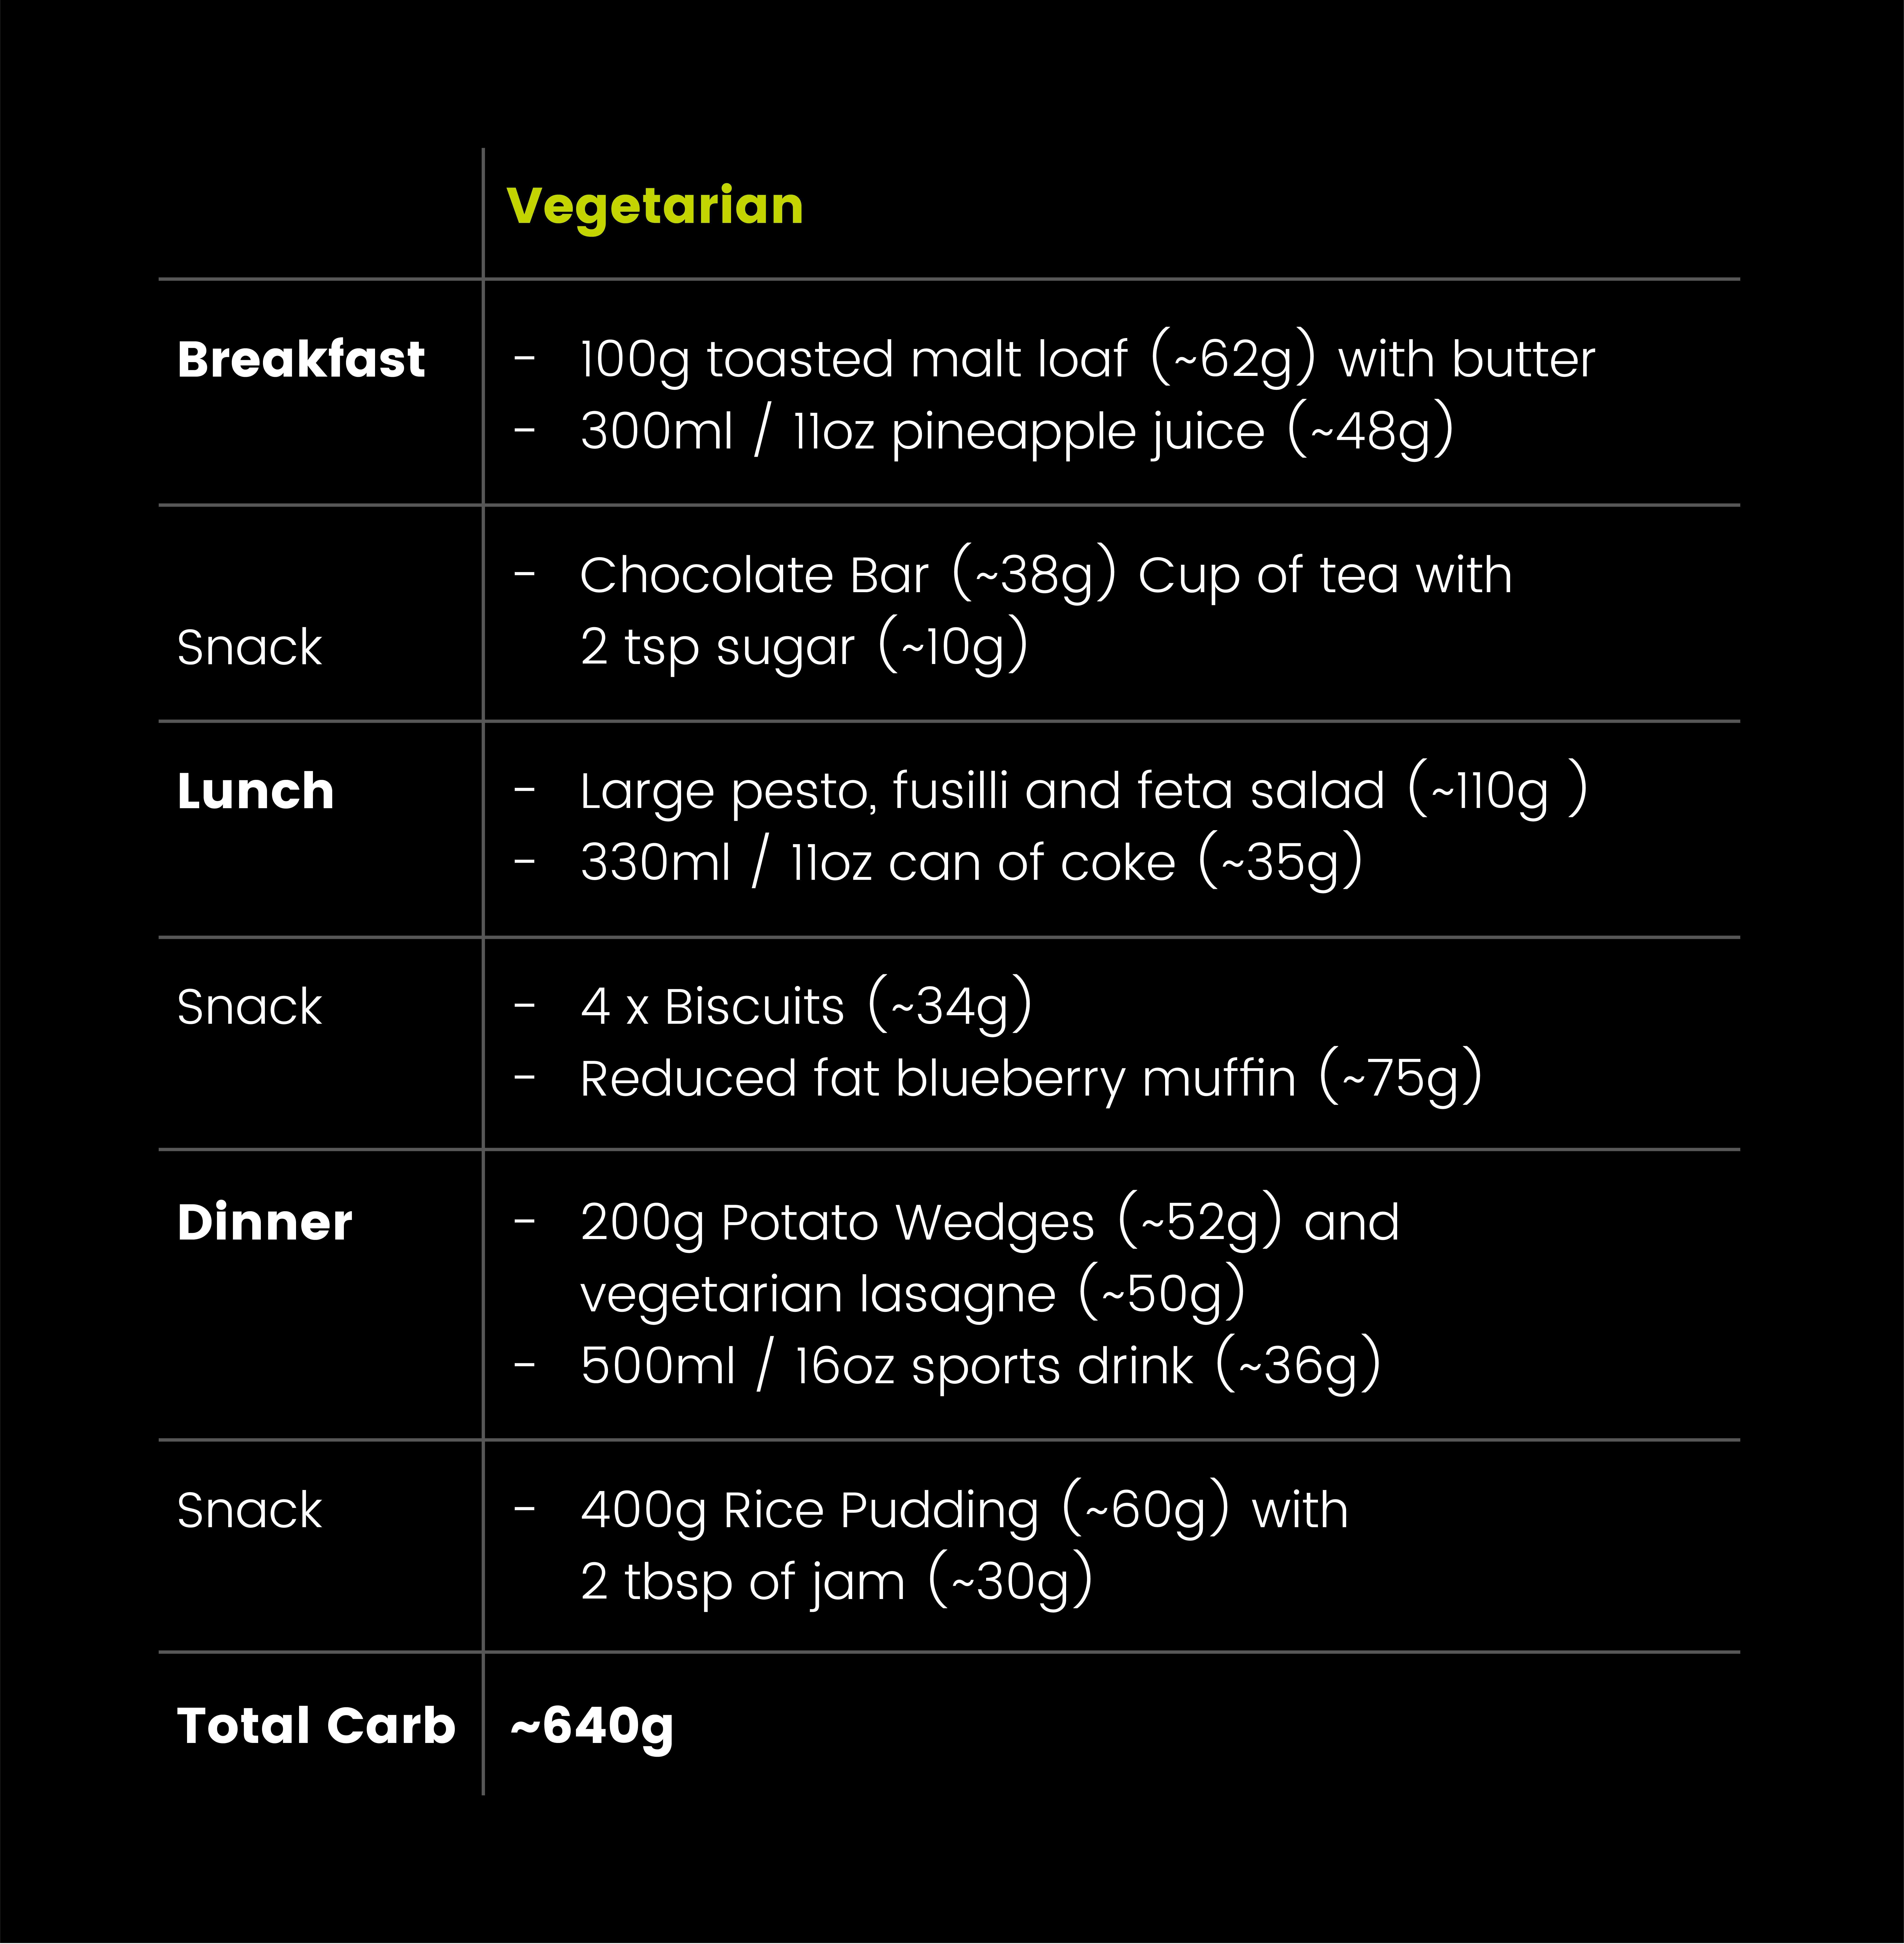 Carbohydrate loading for triathletes